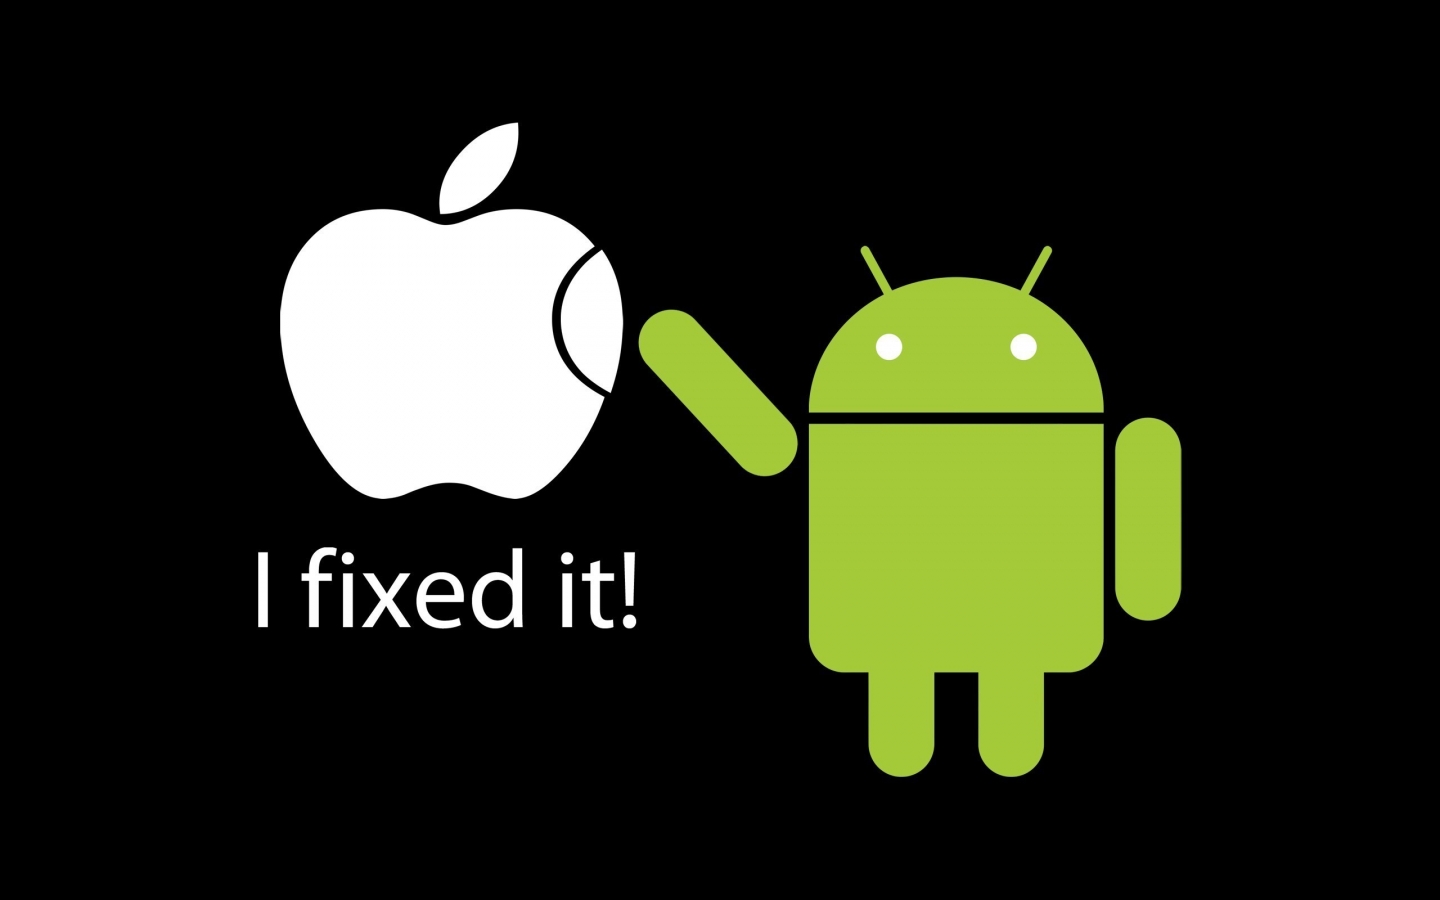 Fixed Apple by Android for 1440 x 900 widescreen resolution